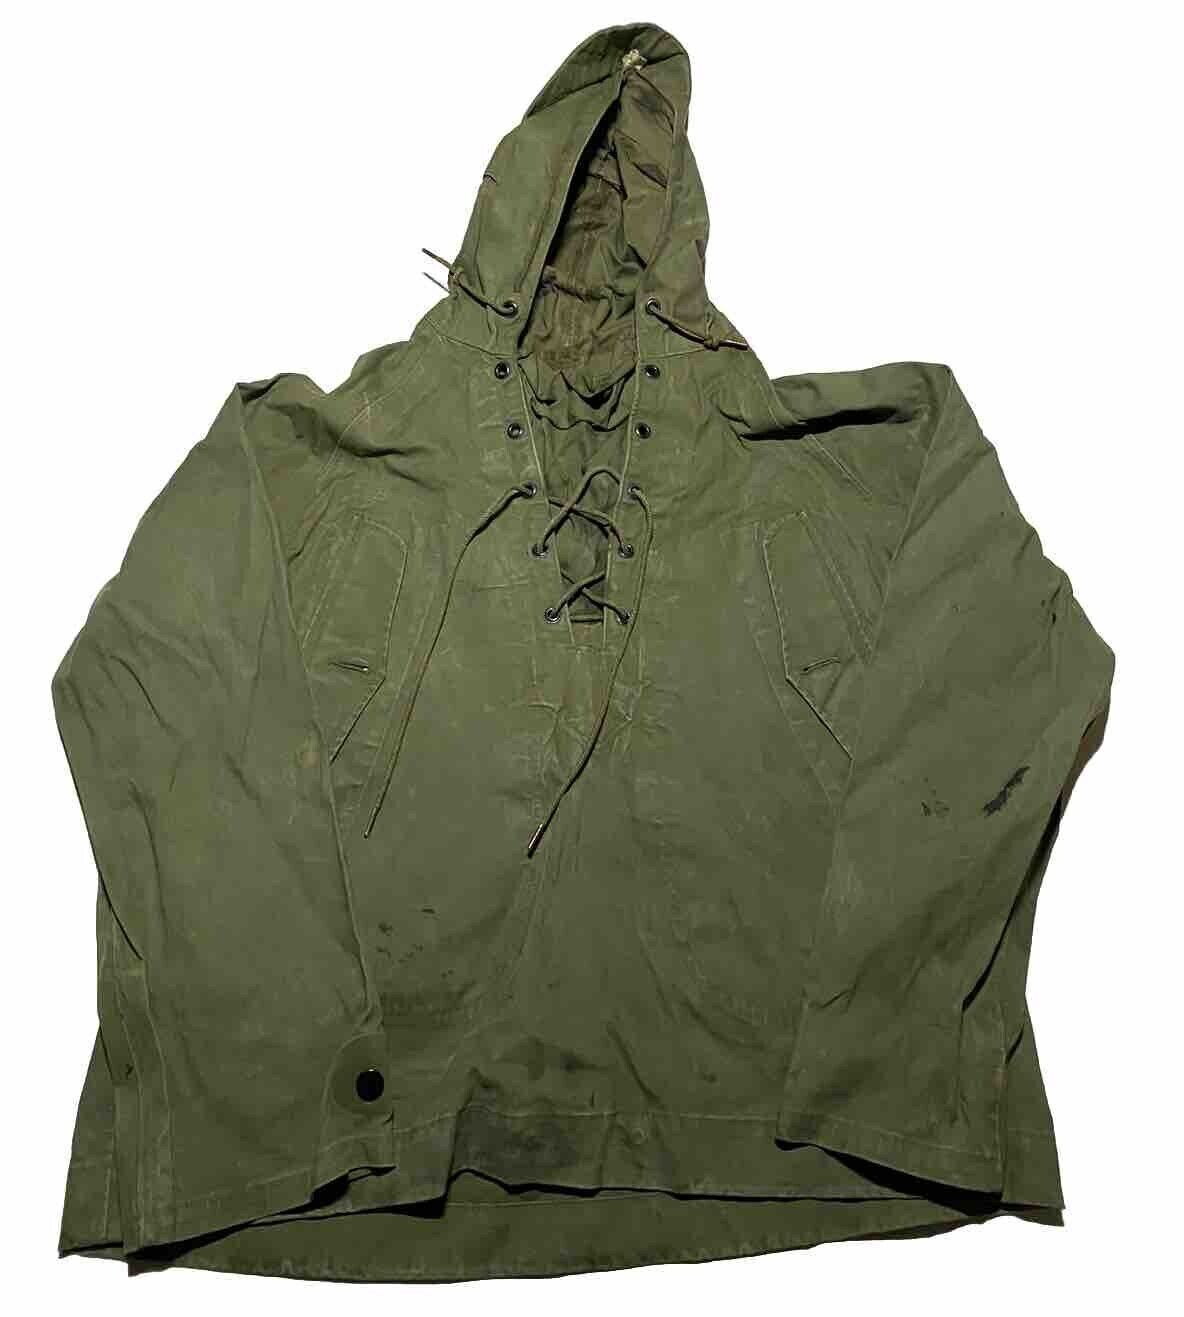 Vintage US Military Smock Jacket Size Small Green AM1